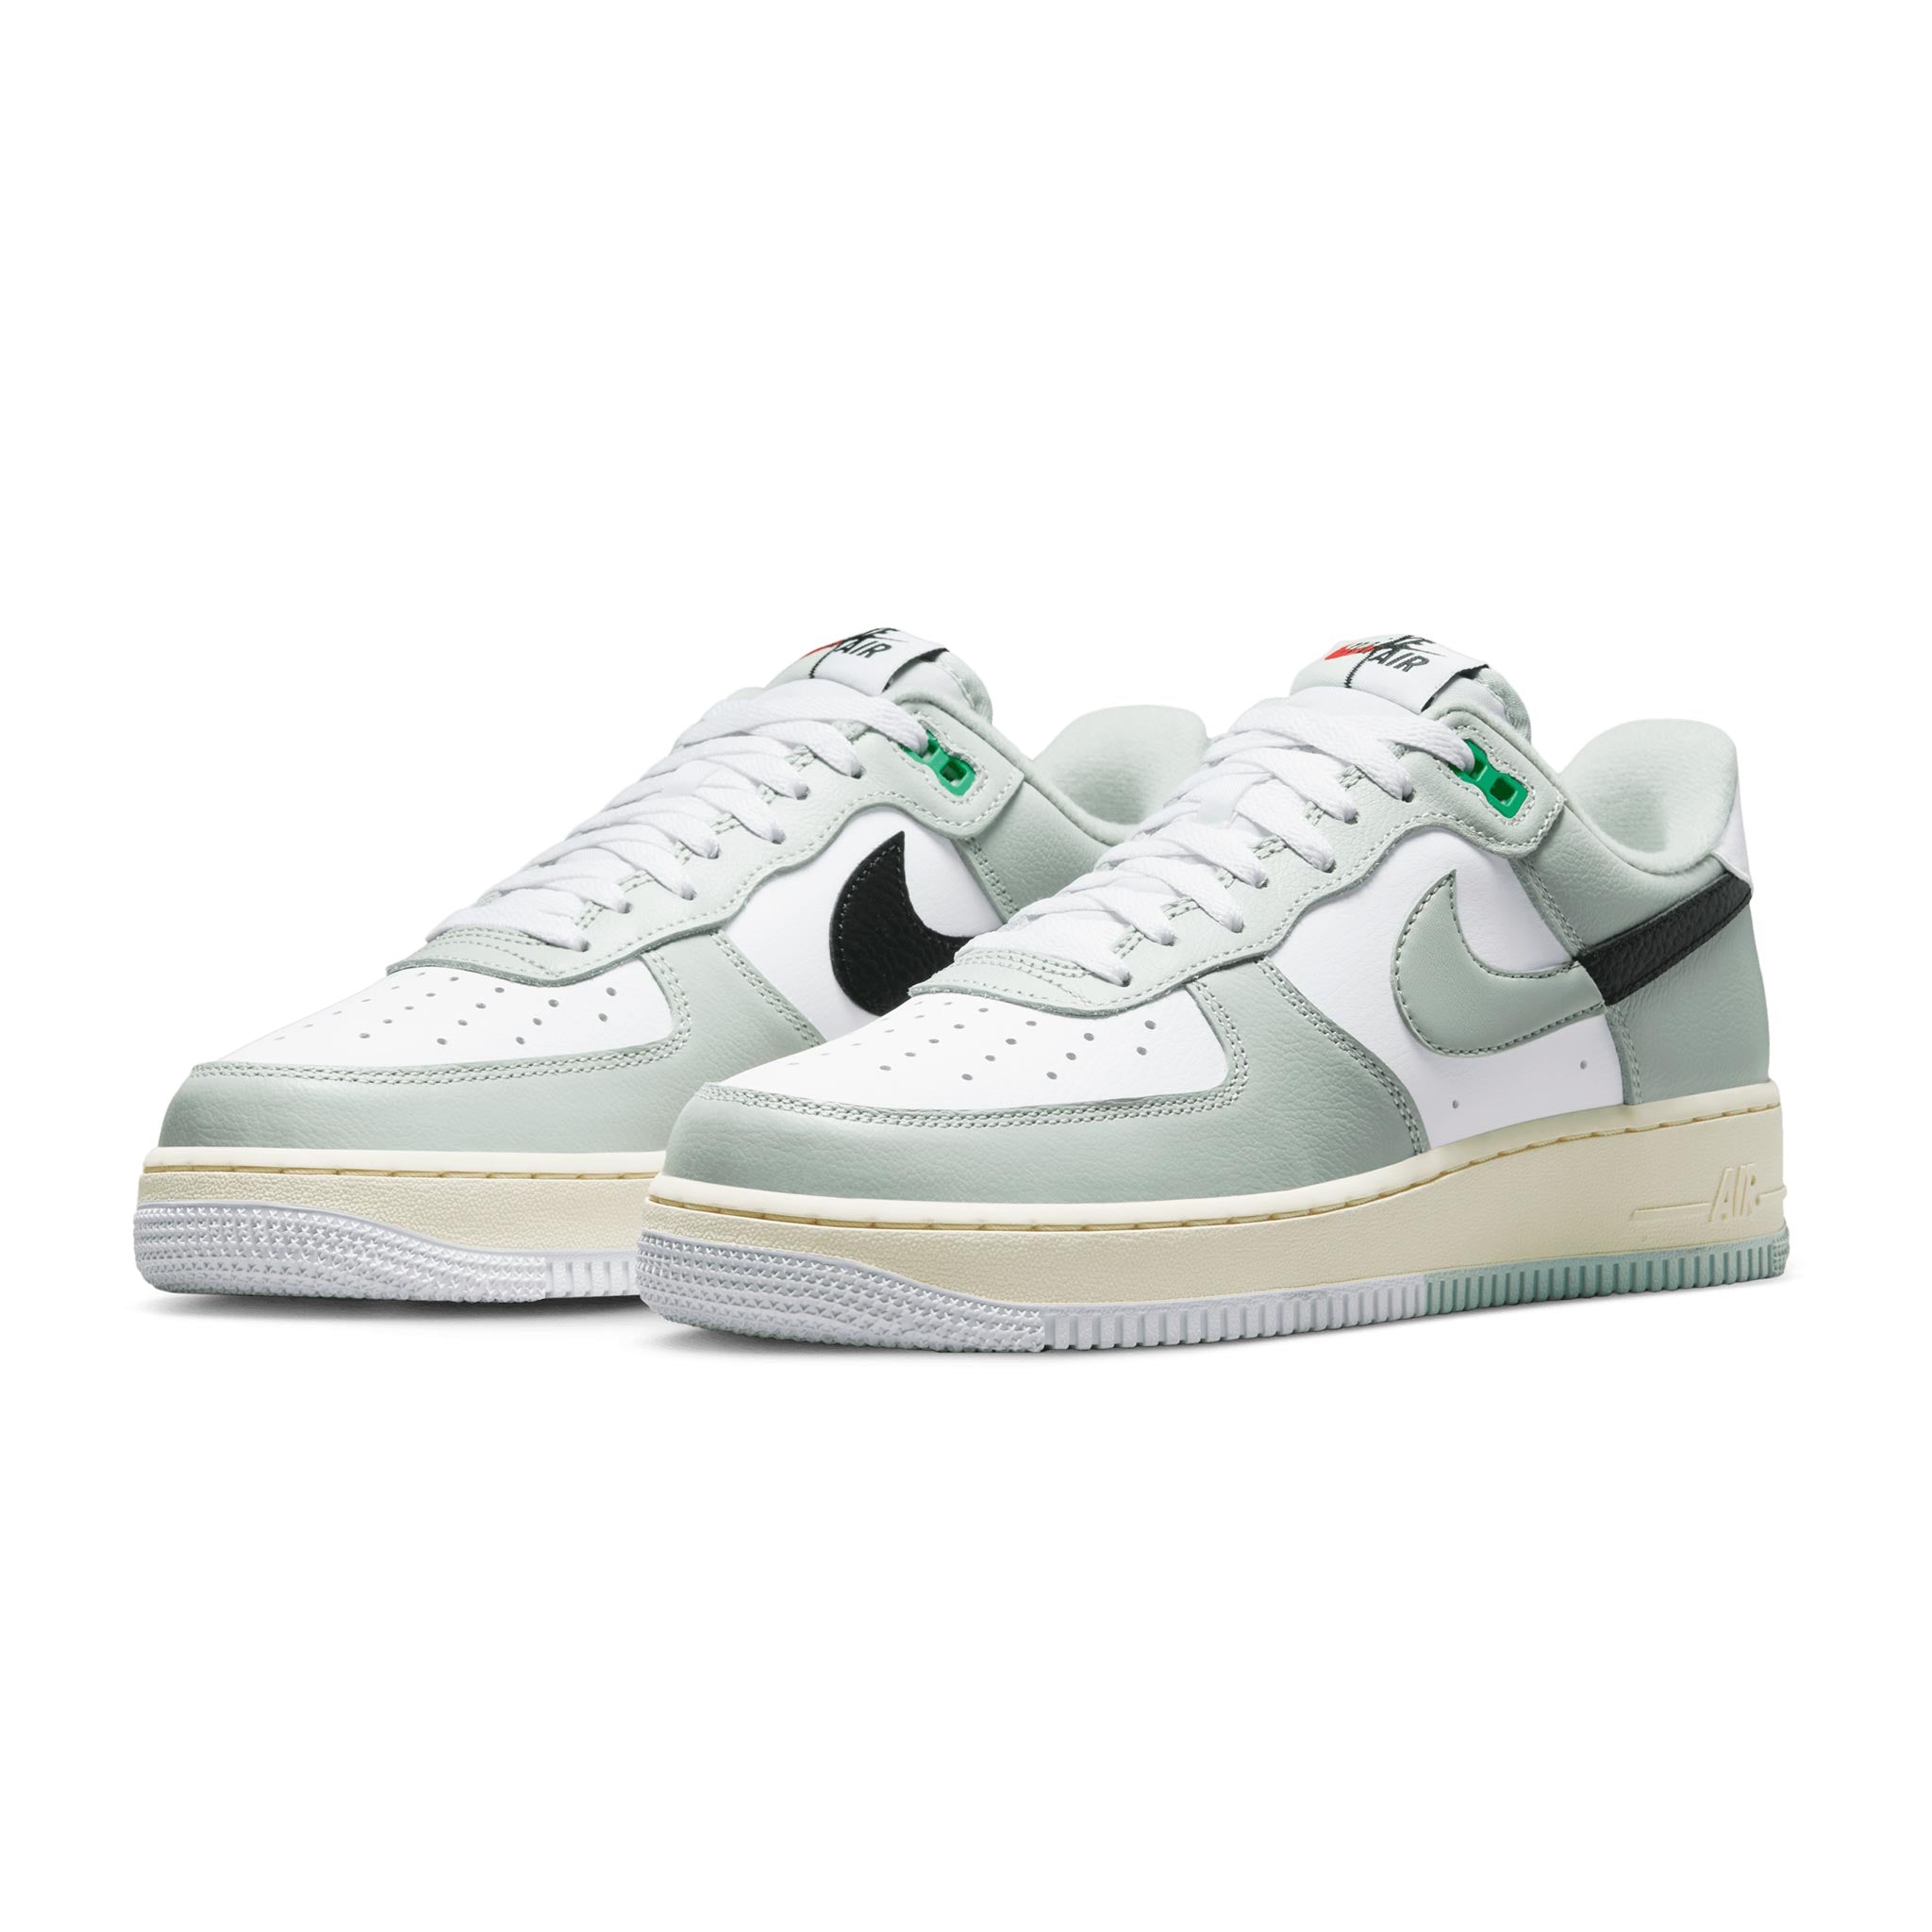 Air Force 1 Low 07 LV8 DZ2522-001 Light Silver